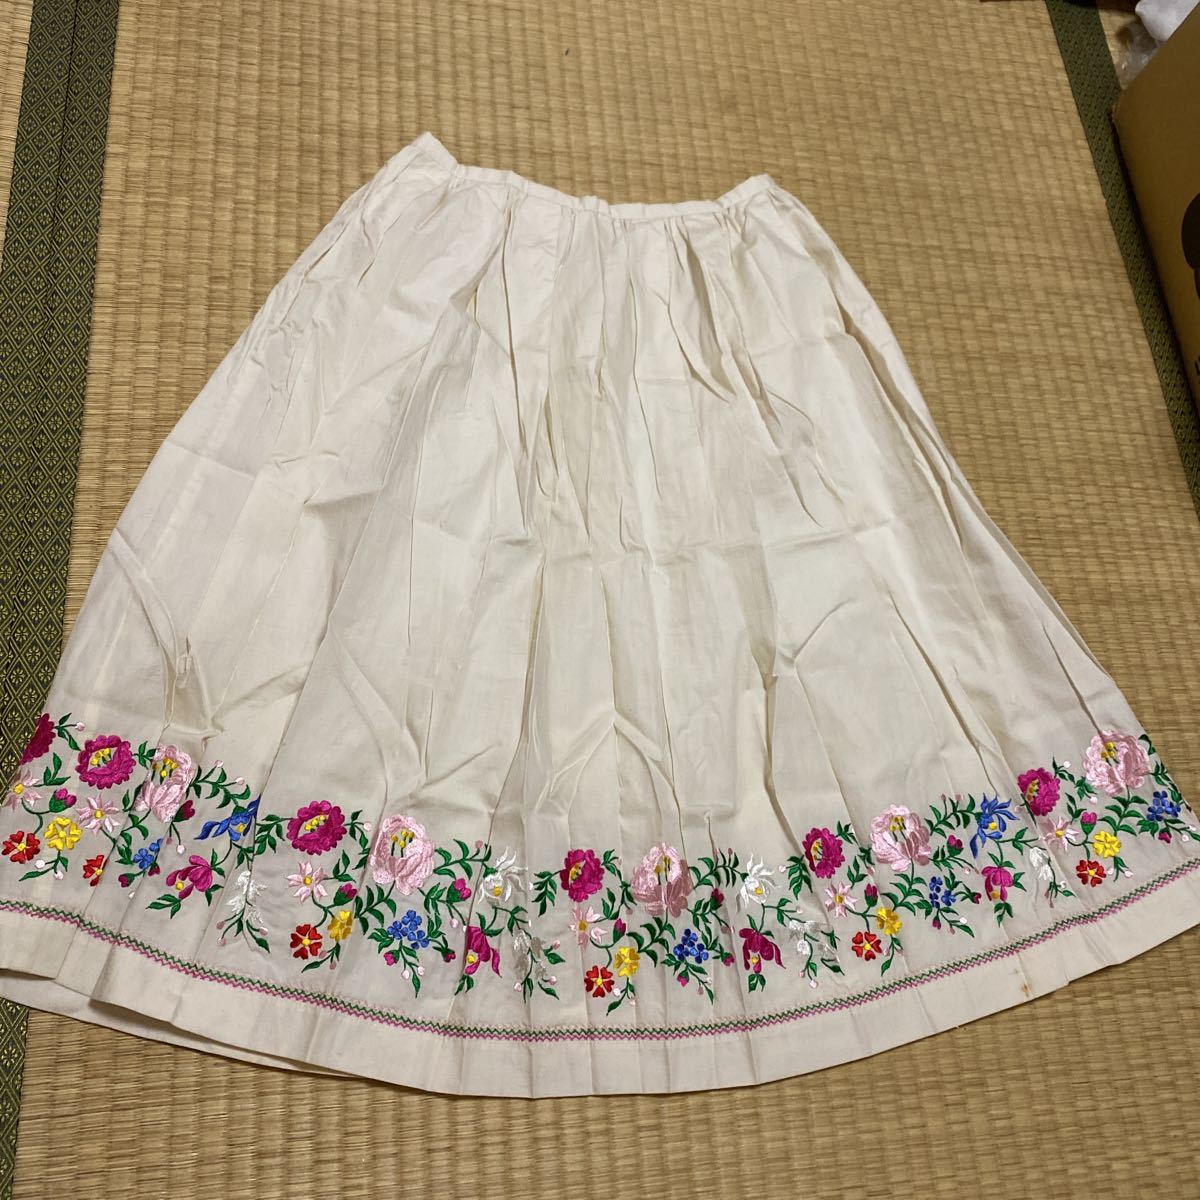 COCUE Cocue skirt knees height brand Southeast Asia Vietnam fashion cotton embroidery floral print beige 